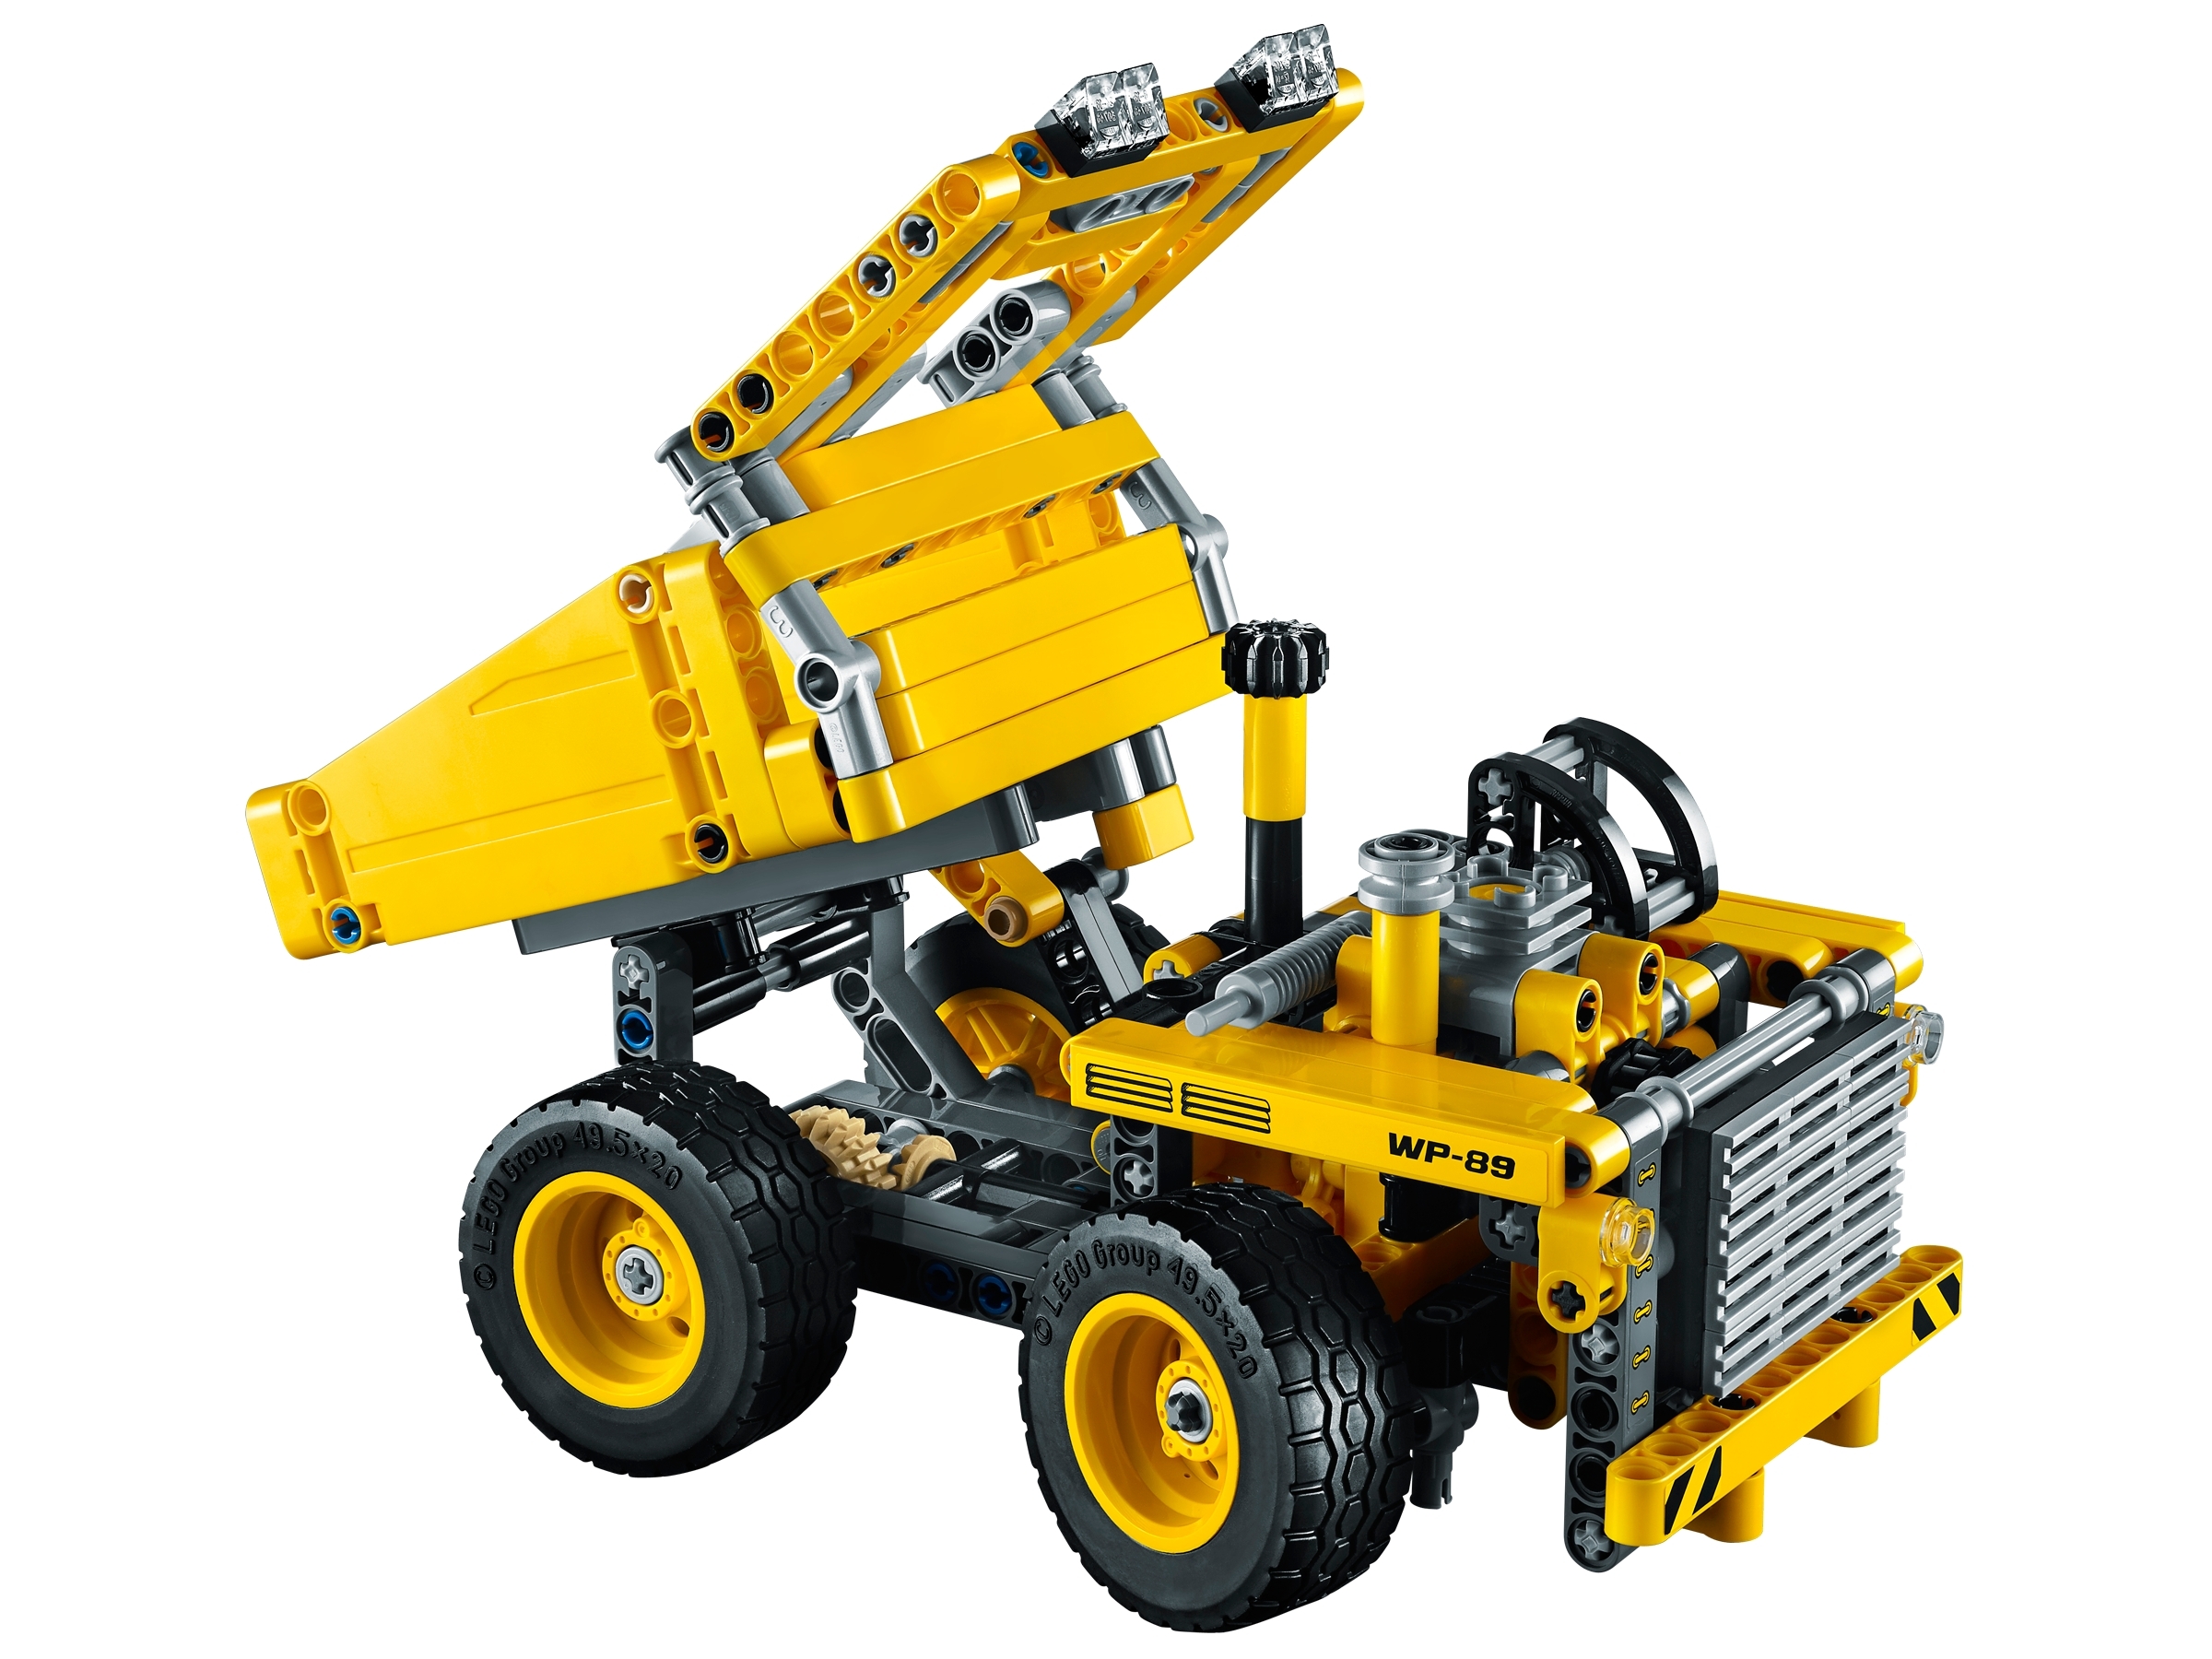 Truck 42035 | Technic™ Buy online at the Official LEGO® Shop US